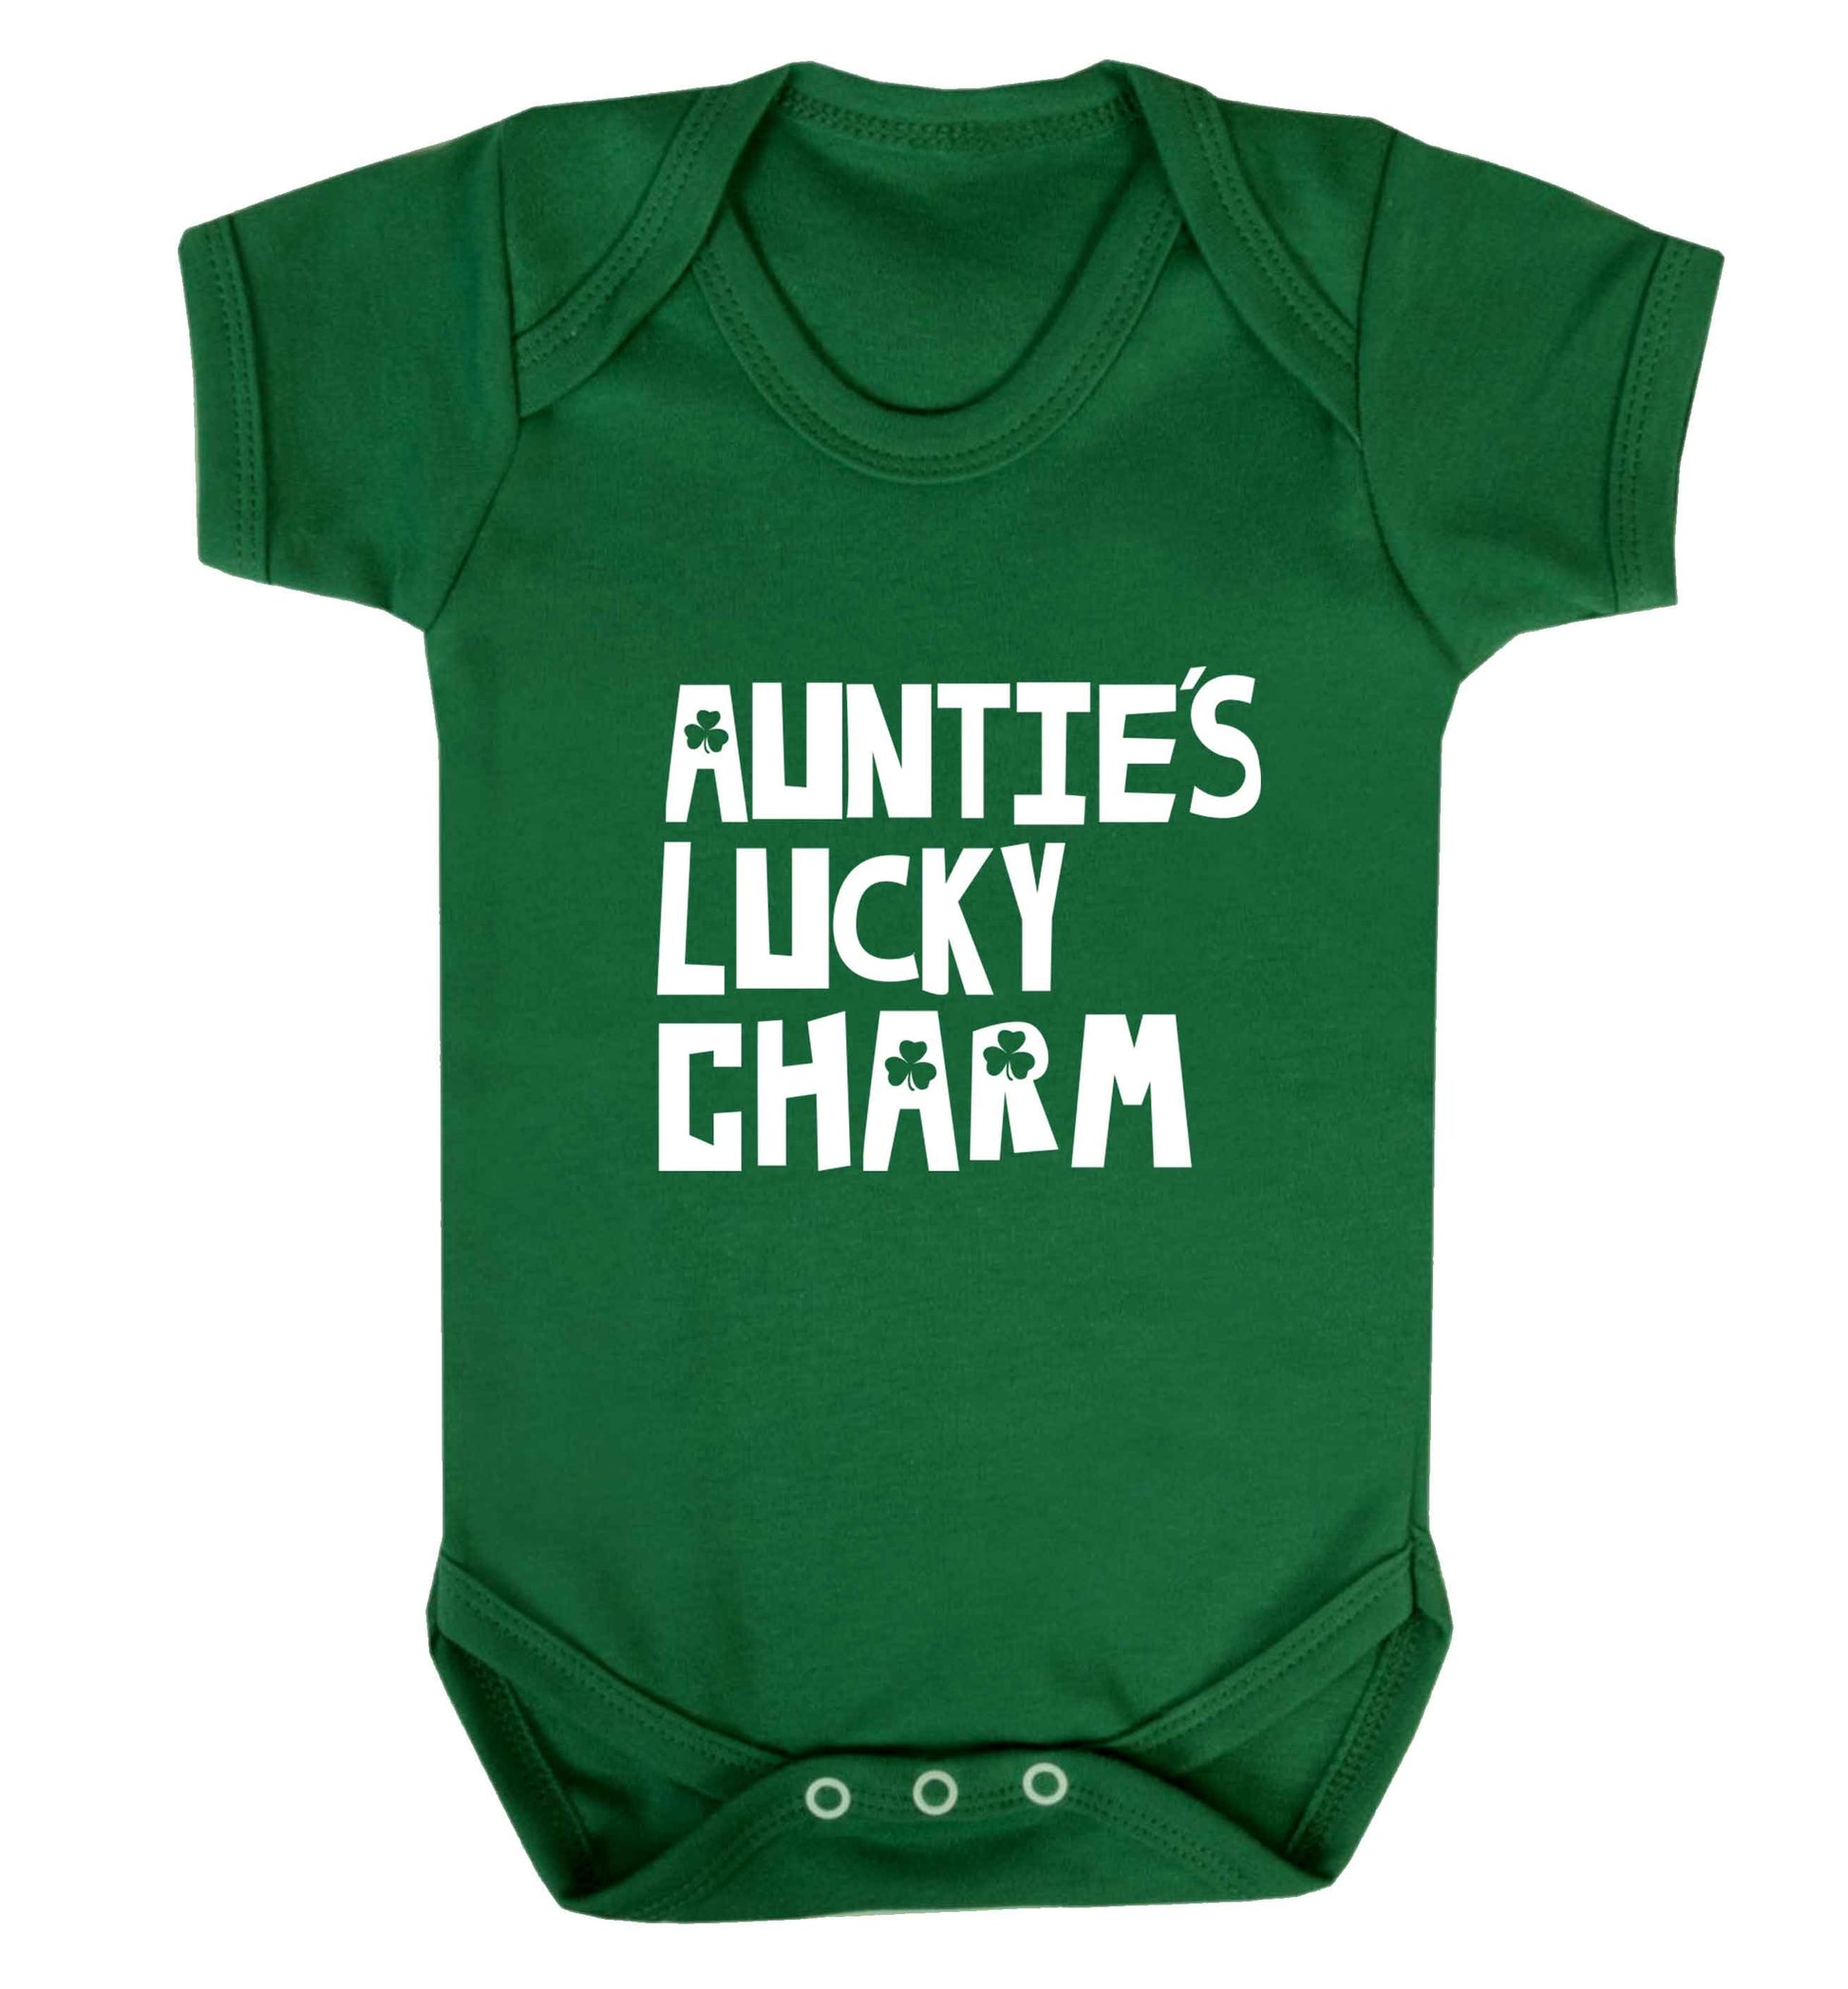 Auntie's lucky charm baby vest green 18-24 months